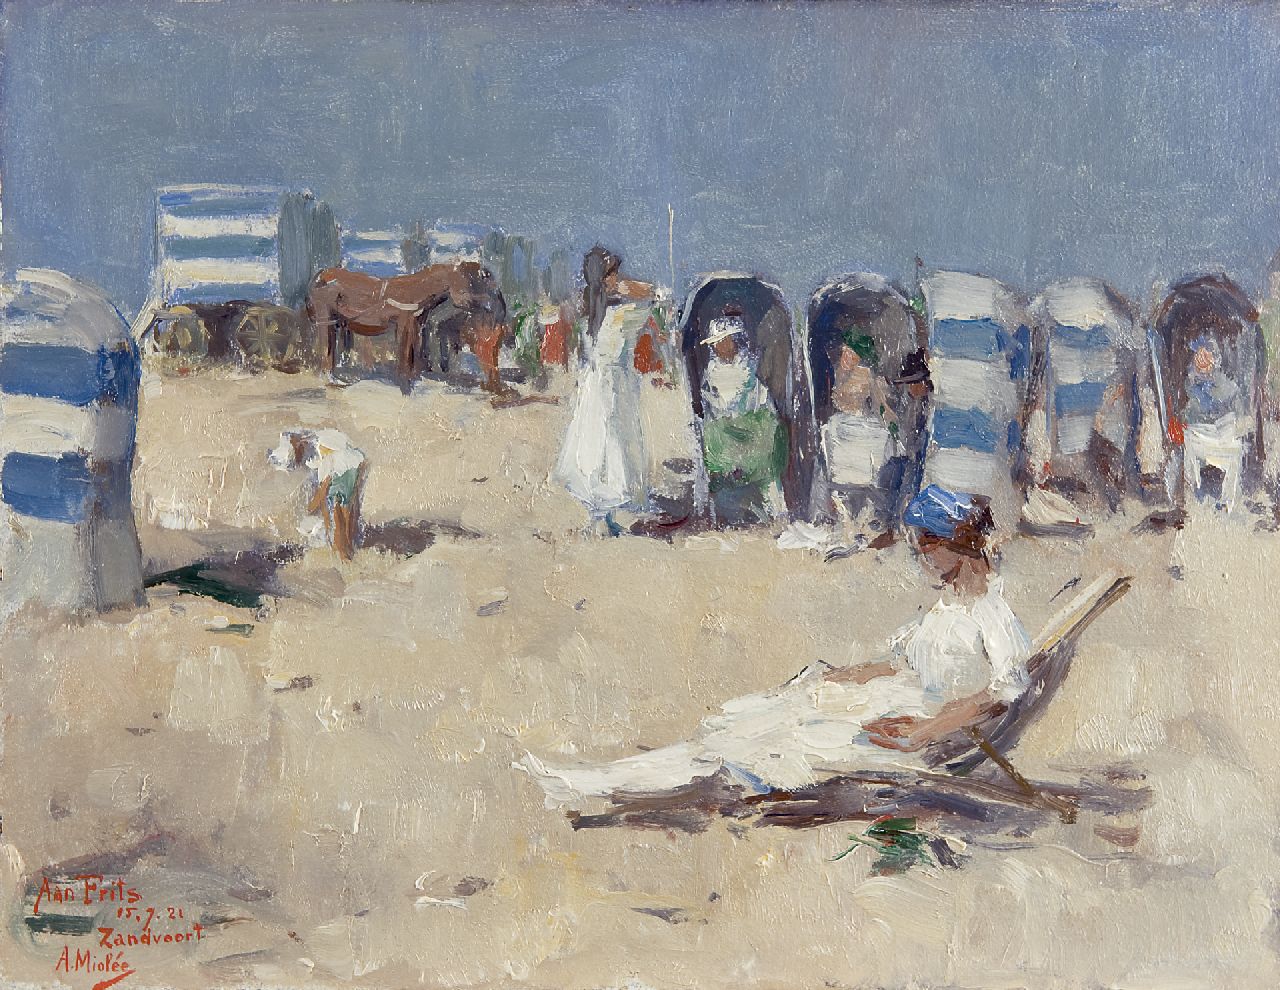 Miolée A.  | Adrianus 'Adriaan' Miolée, A day at the beach, Zandvoort, oil on board 26.8 x 34.8 cm, signed l.l. and dated 15.7.21